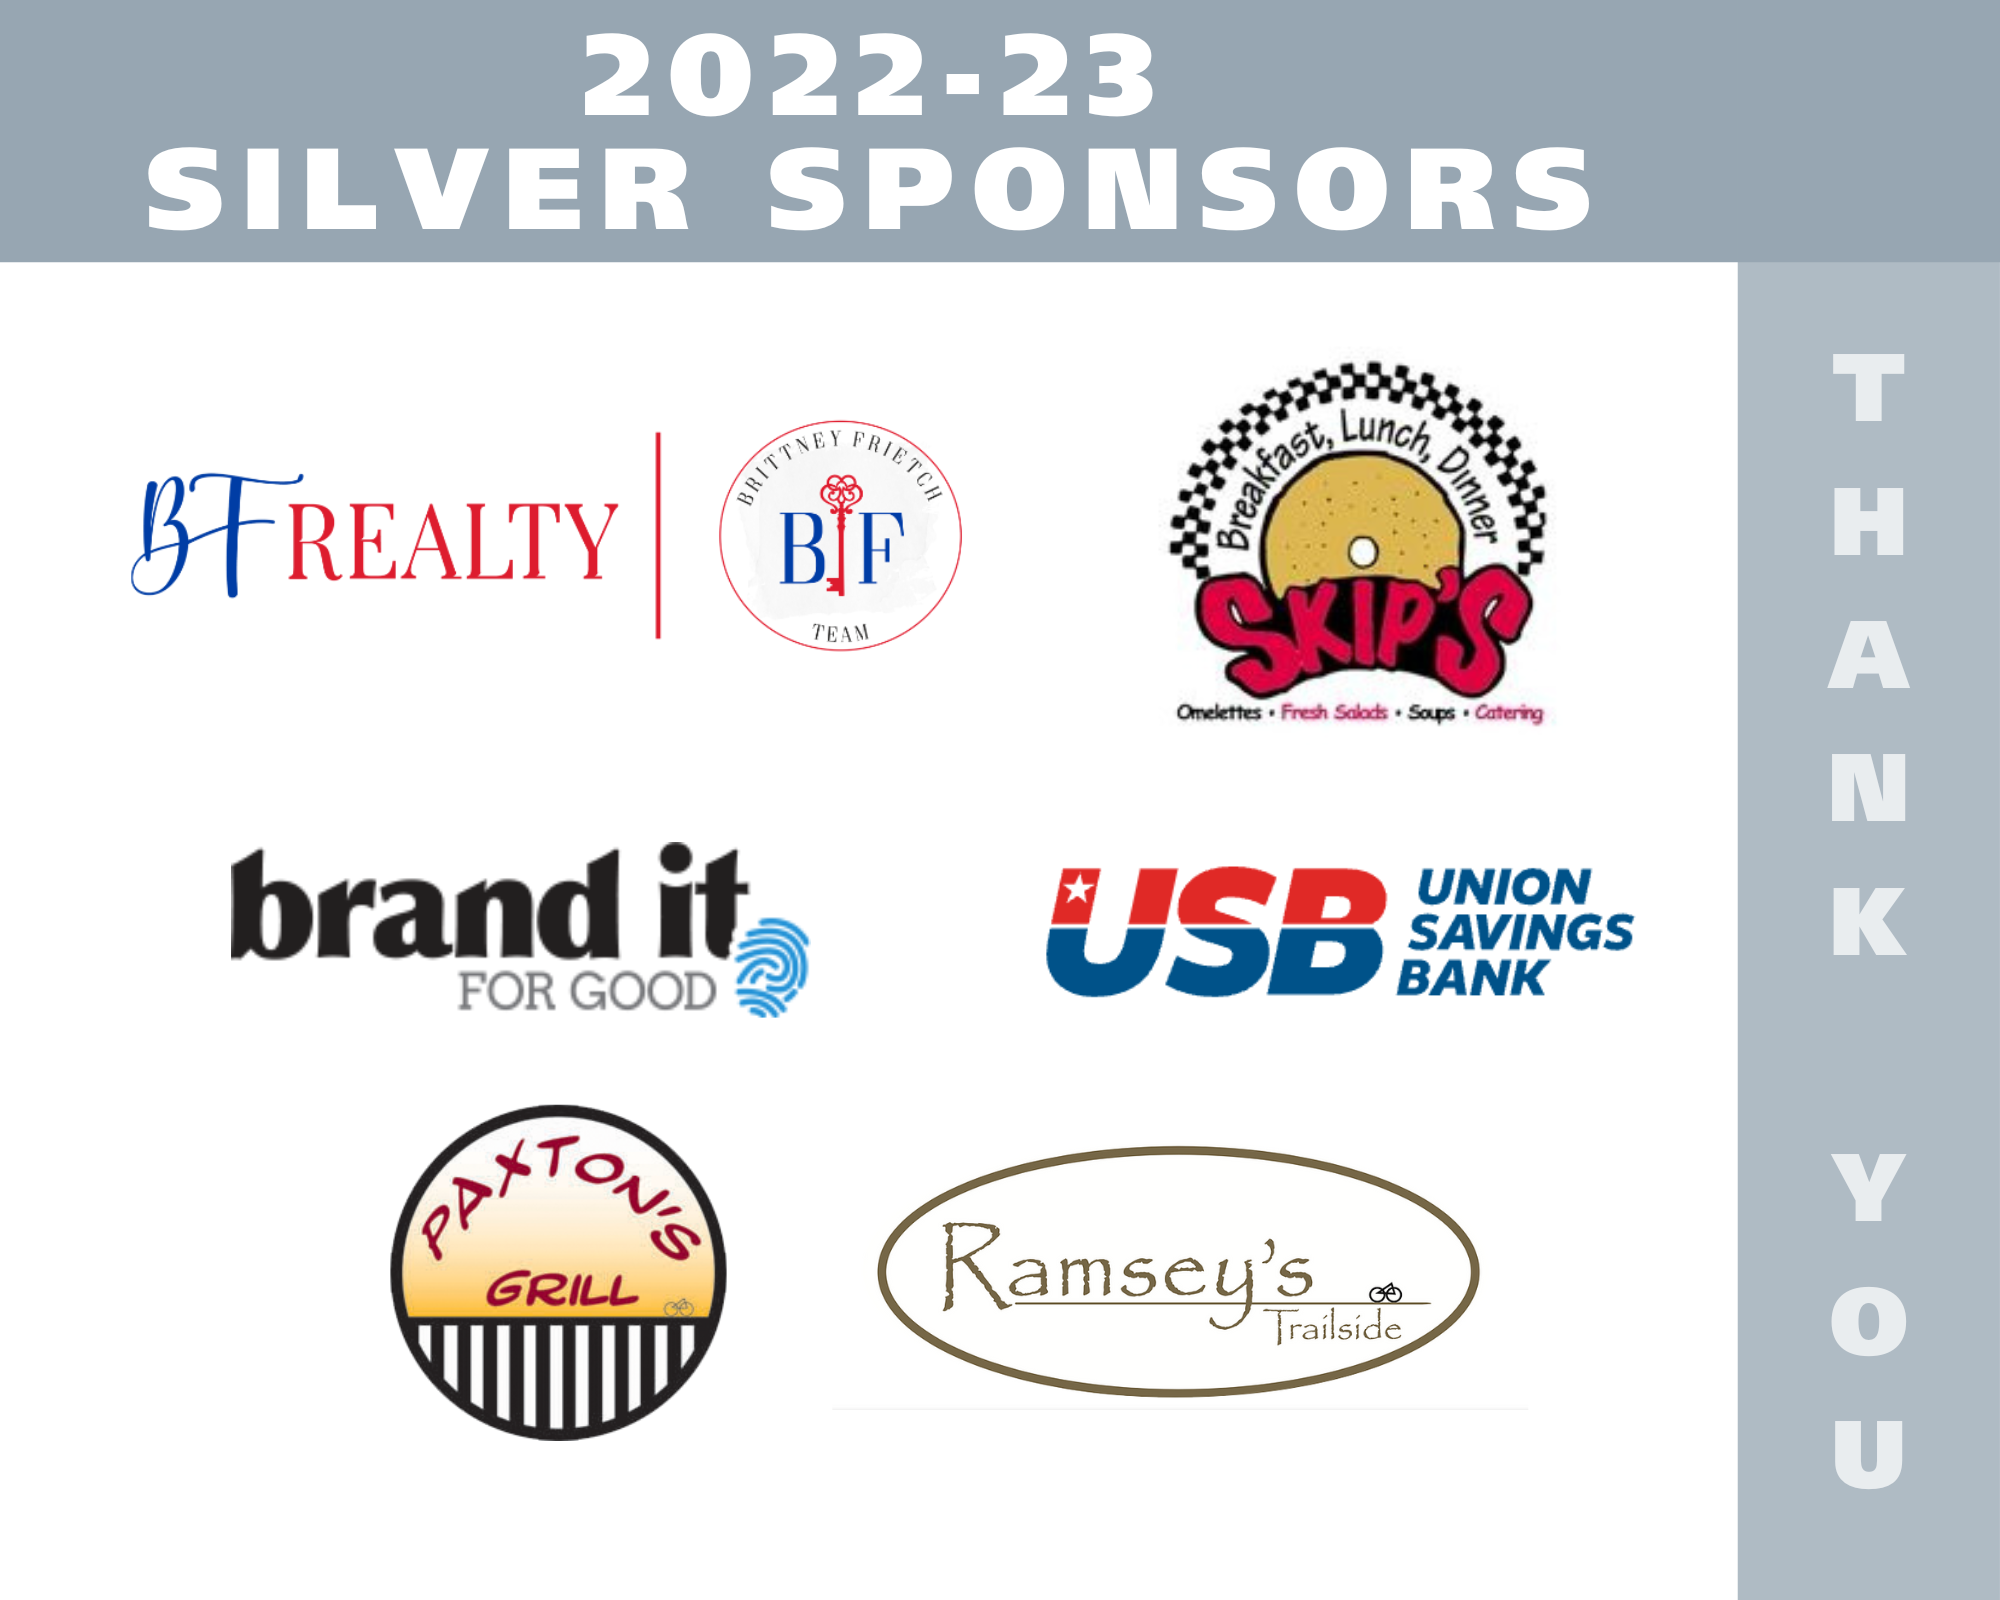 silver-sponsors-22-23.png